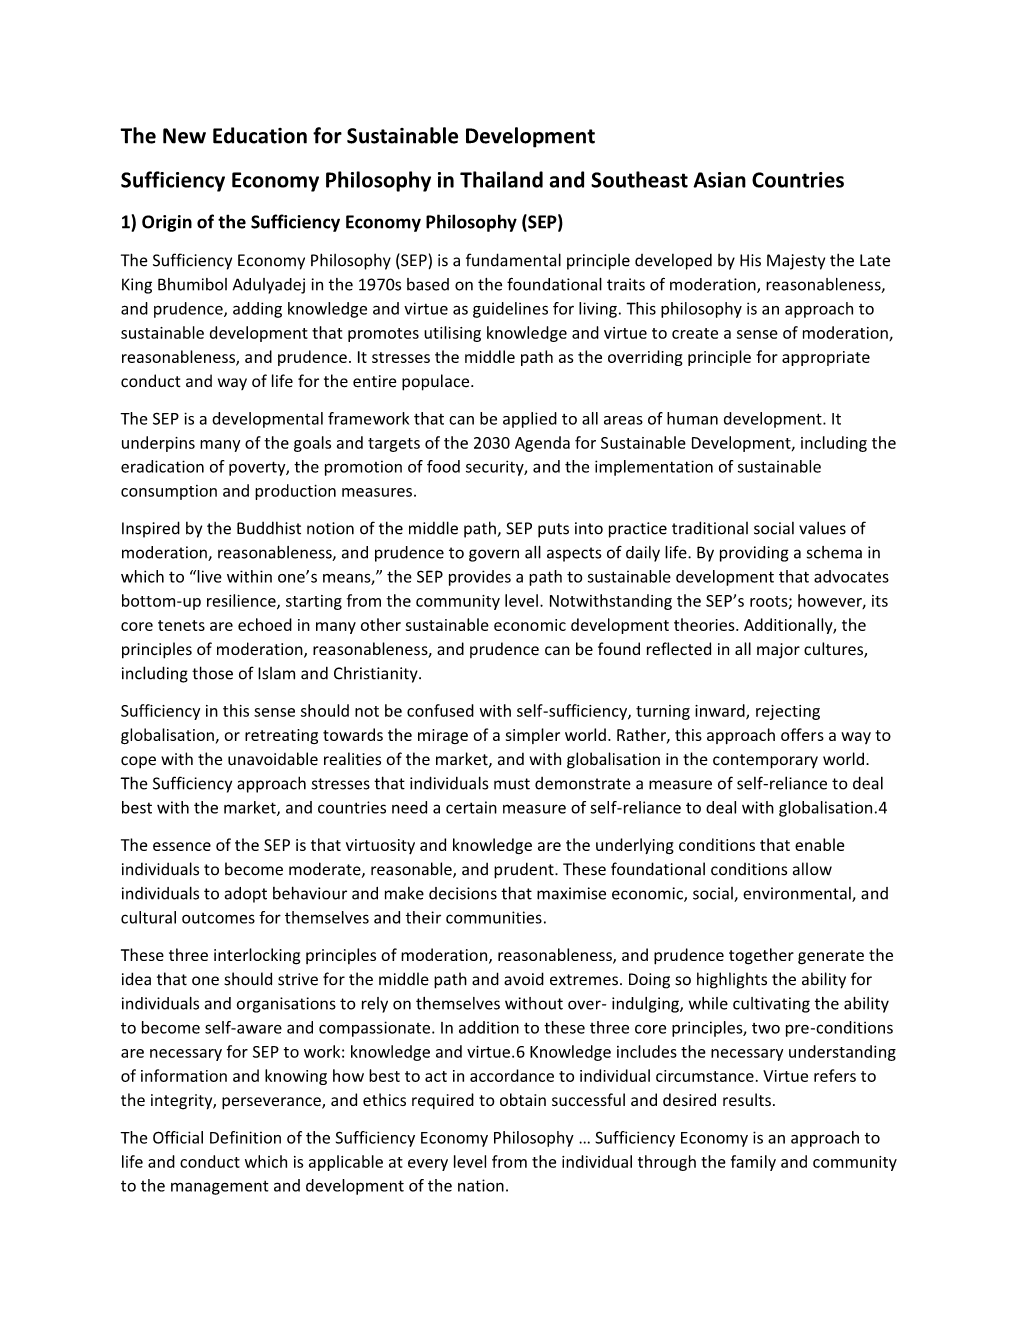 The New Education for Sustainable Development Sufficiency Economy Philosophy in Thailand and Southeast Asian Countries